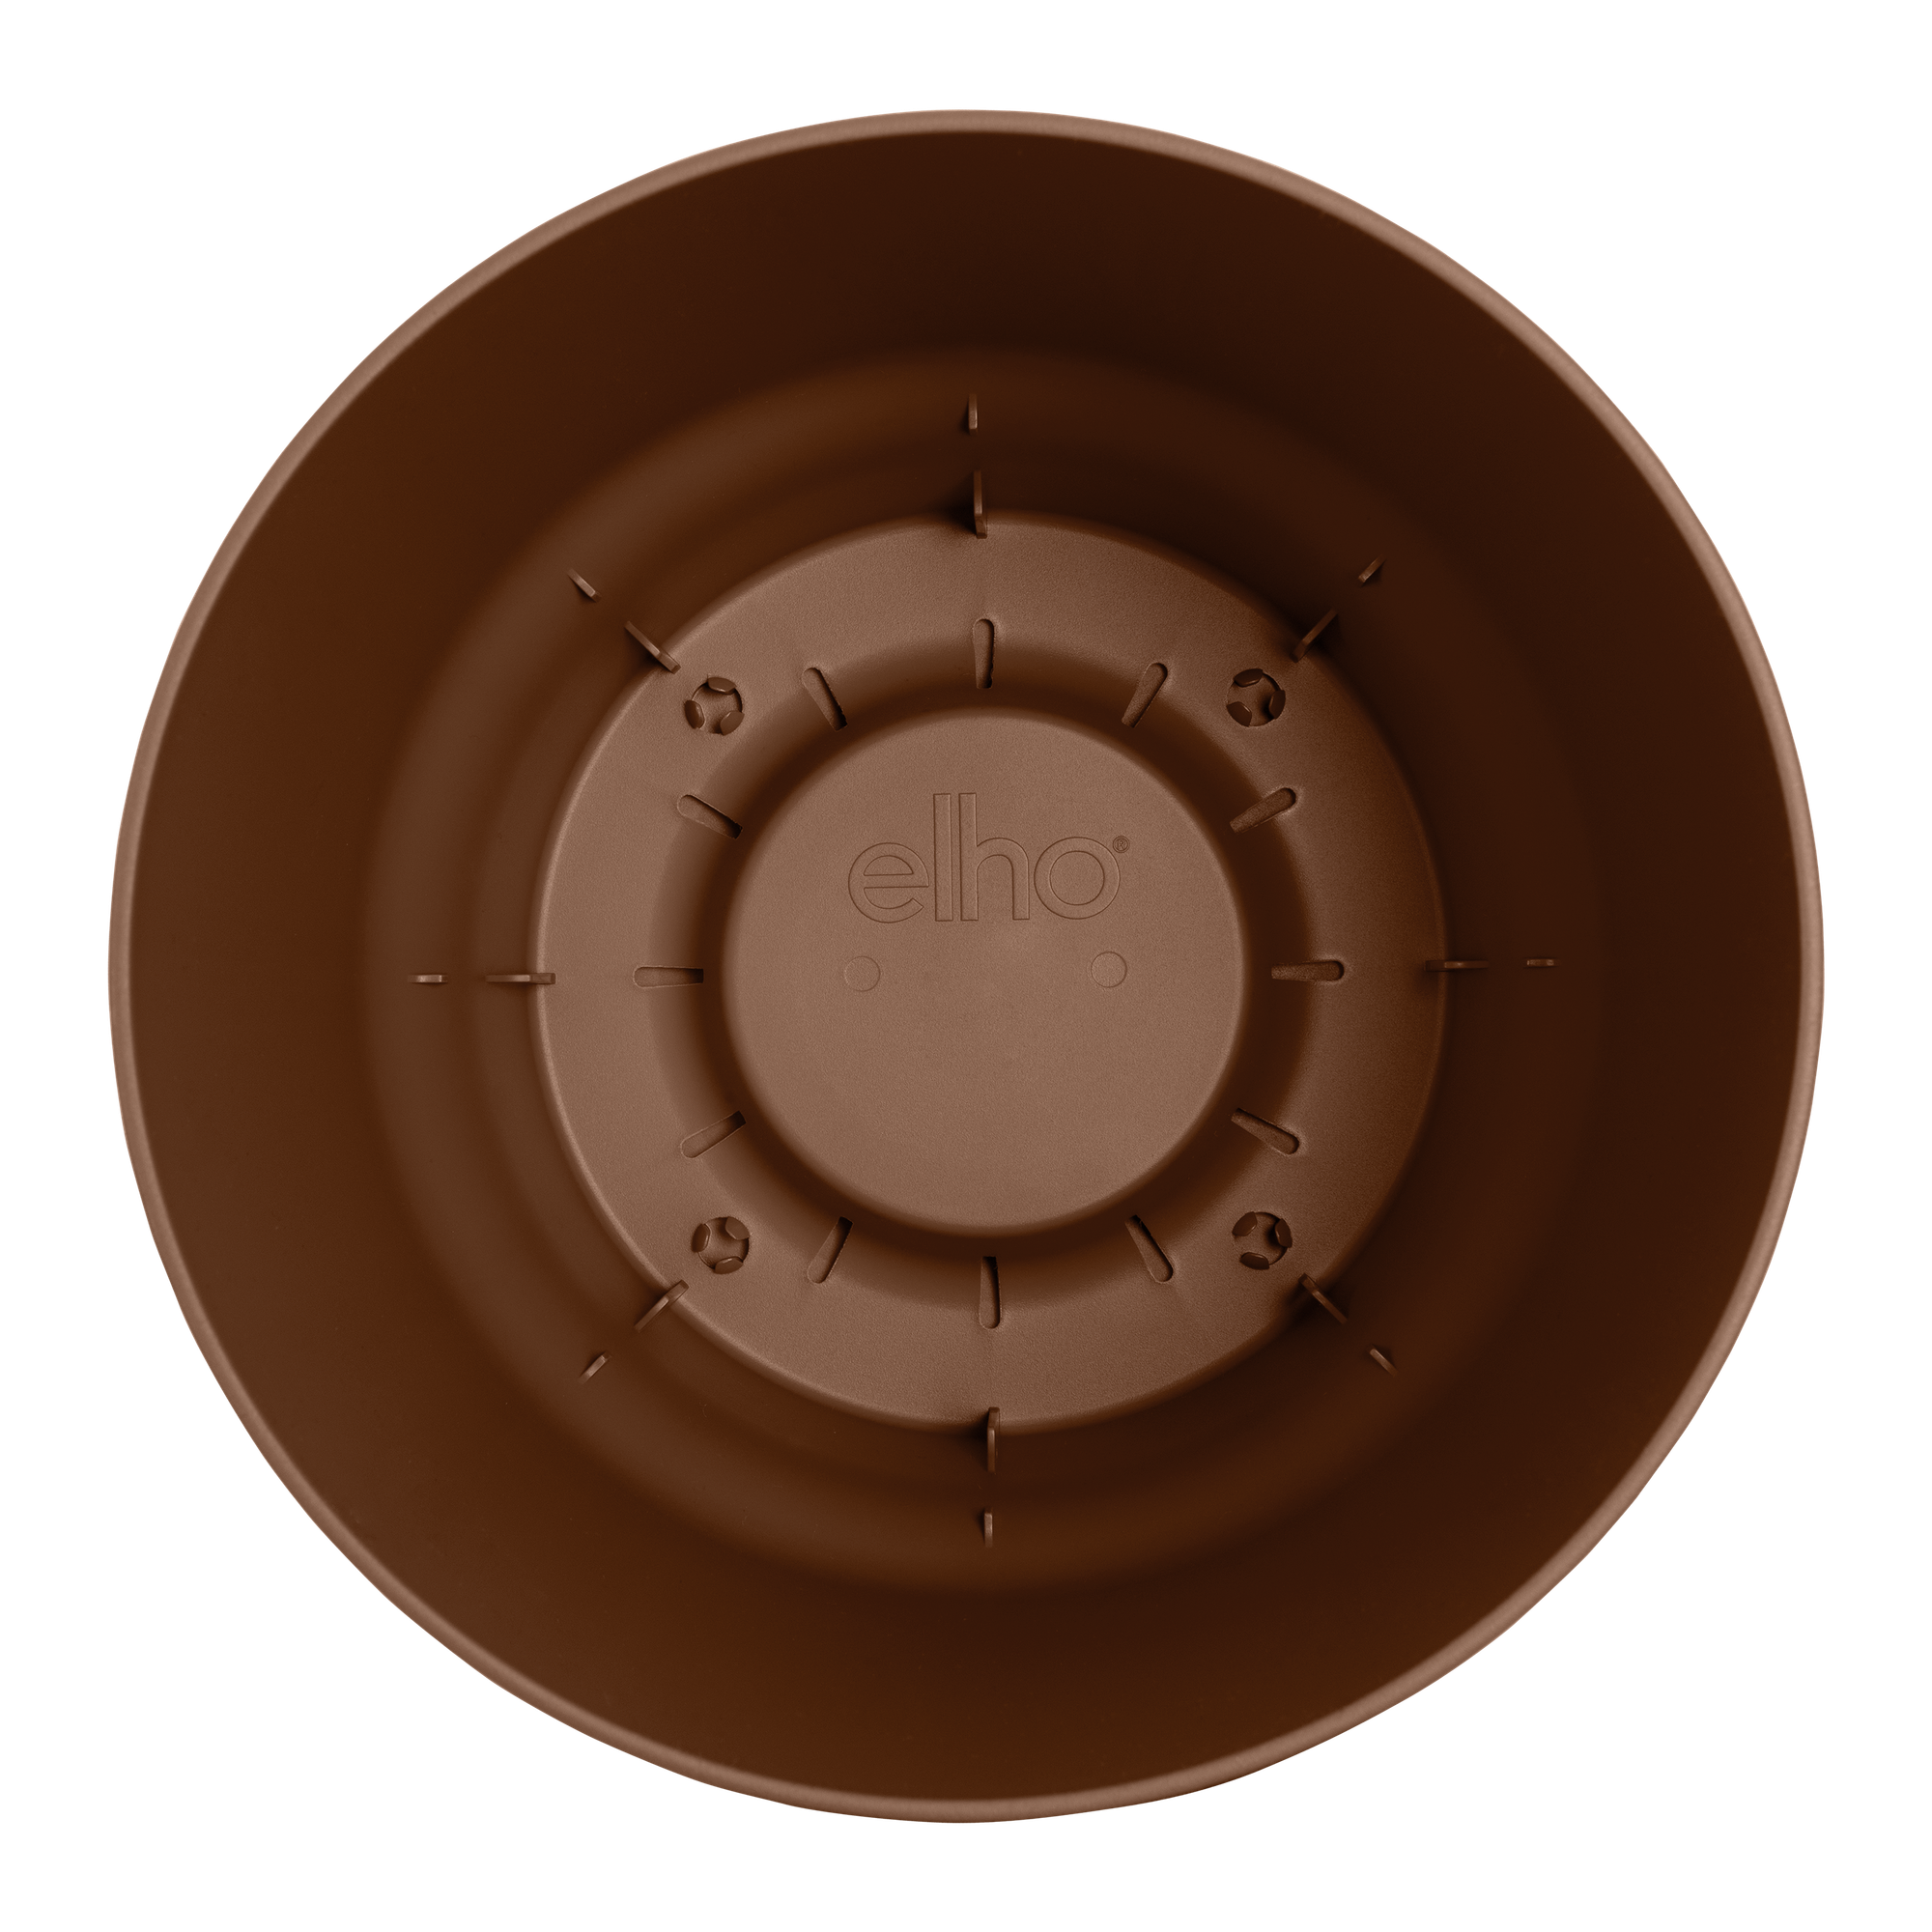 greenville round 14cm ginger brown - elho® - Give room to nature